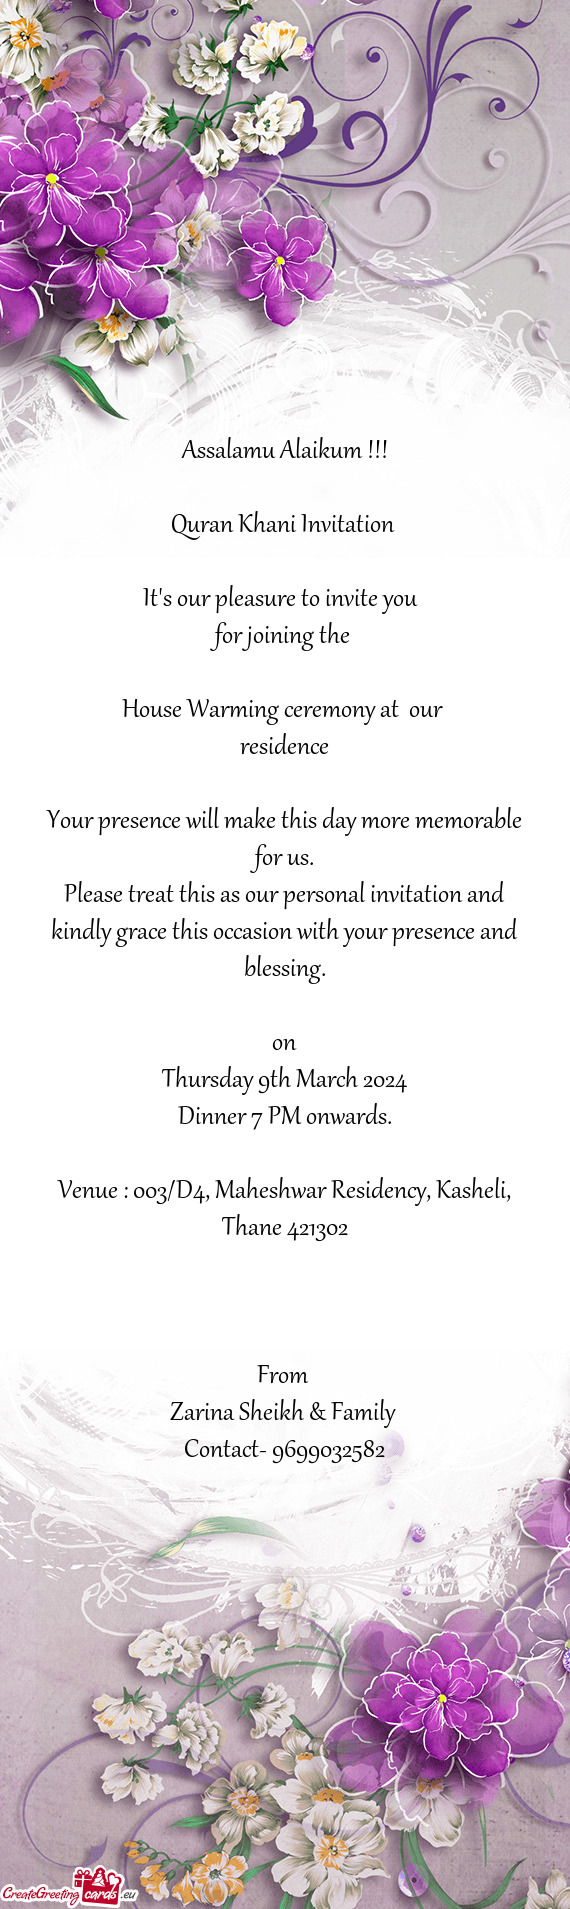 House Warming ceremony at our